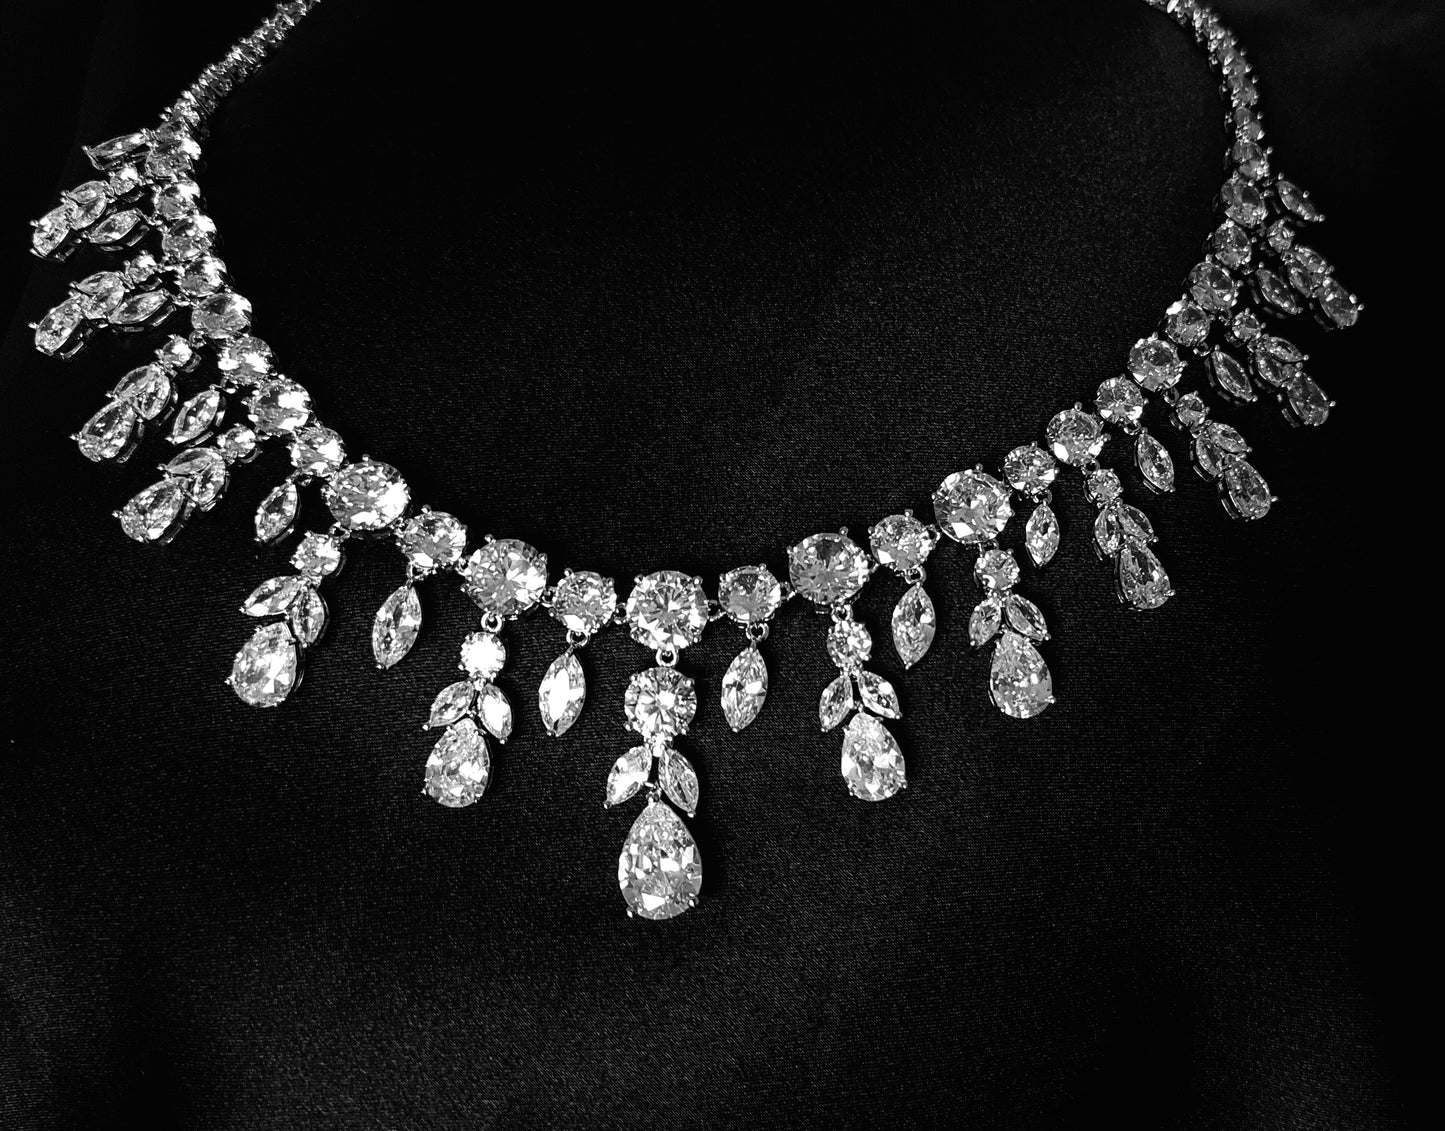  Close-up view of a diamond necklace sparkling with zirconia Diamonds displayed on a black table.  the stones are teardrop shape